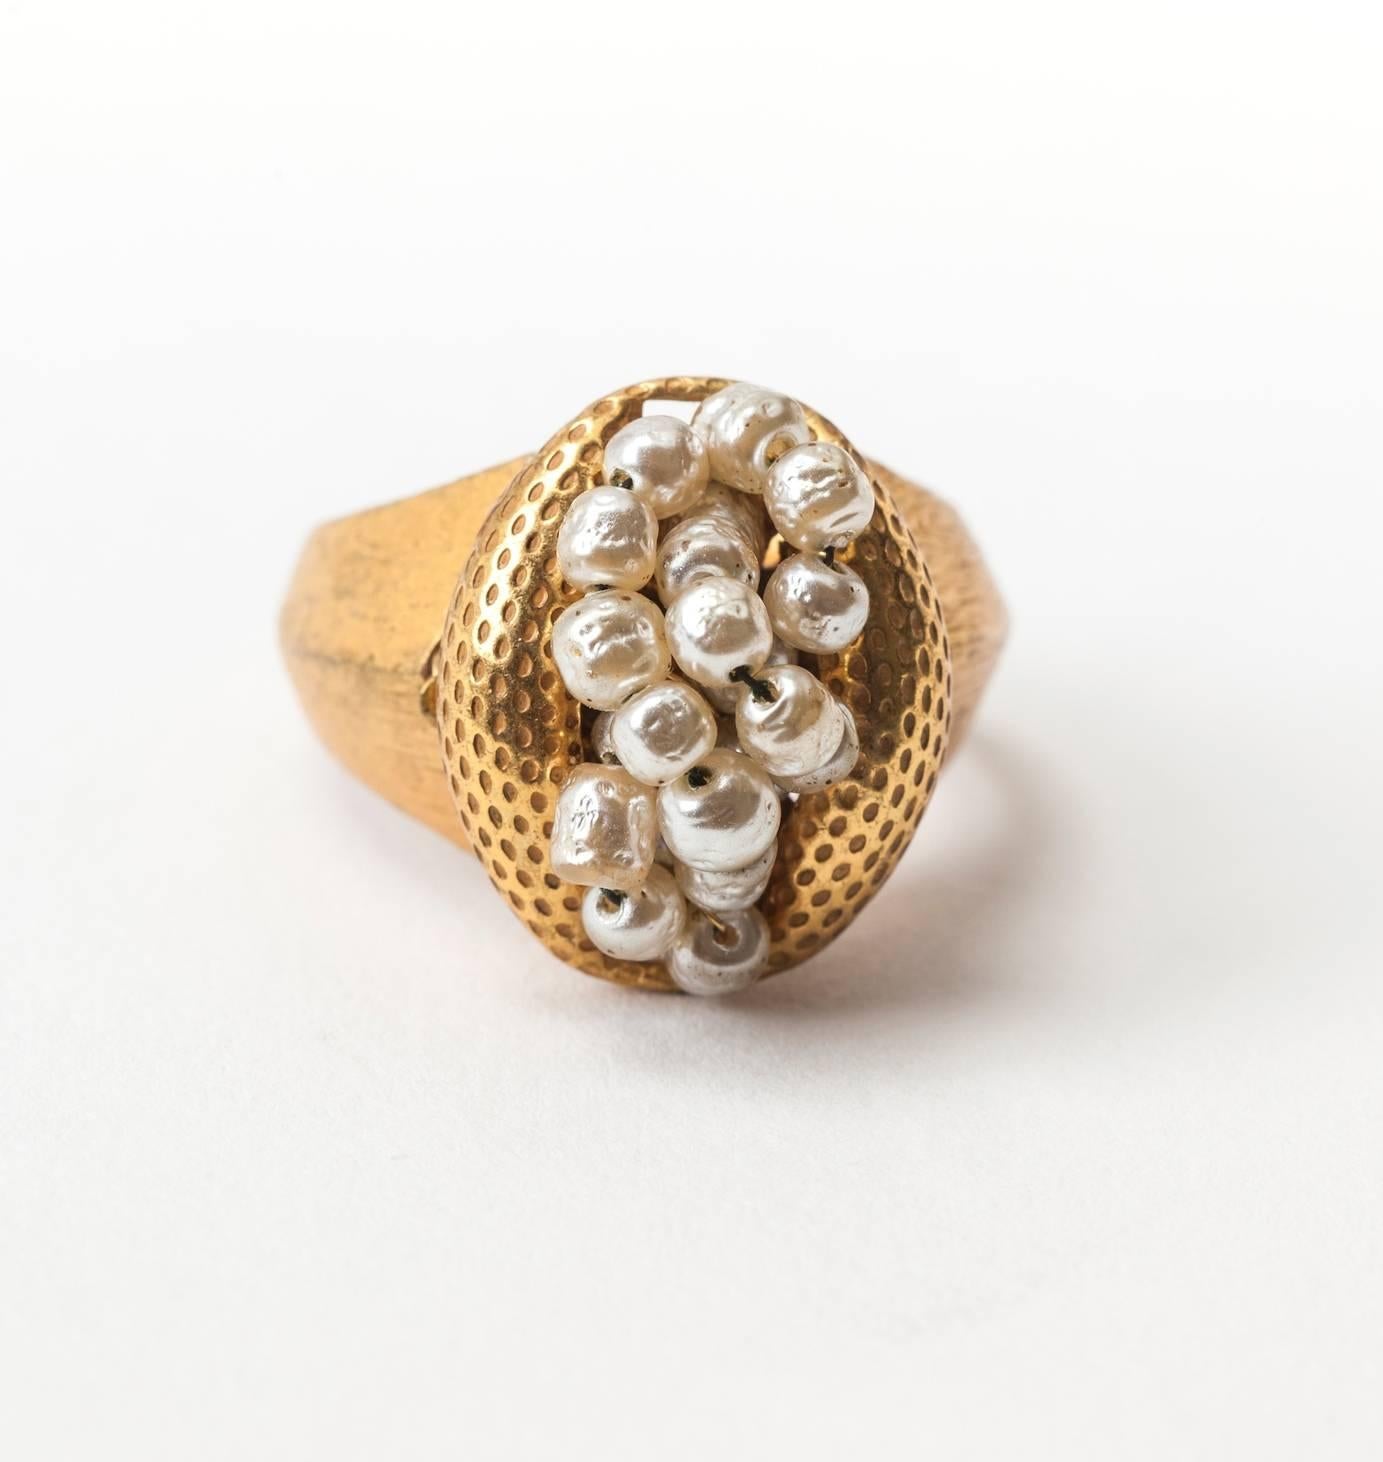 Miriam Haskell hand sewn faux baroque pearl cluster ring in signature Russian Gilt dimpled and textured metal. Signed with oval plaque. Excellent Condition.
Adjustable inner shank. 1950's USA.  Height .75